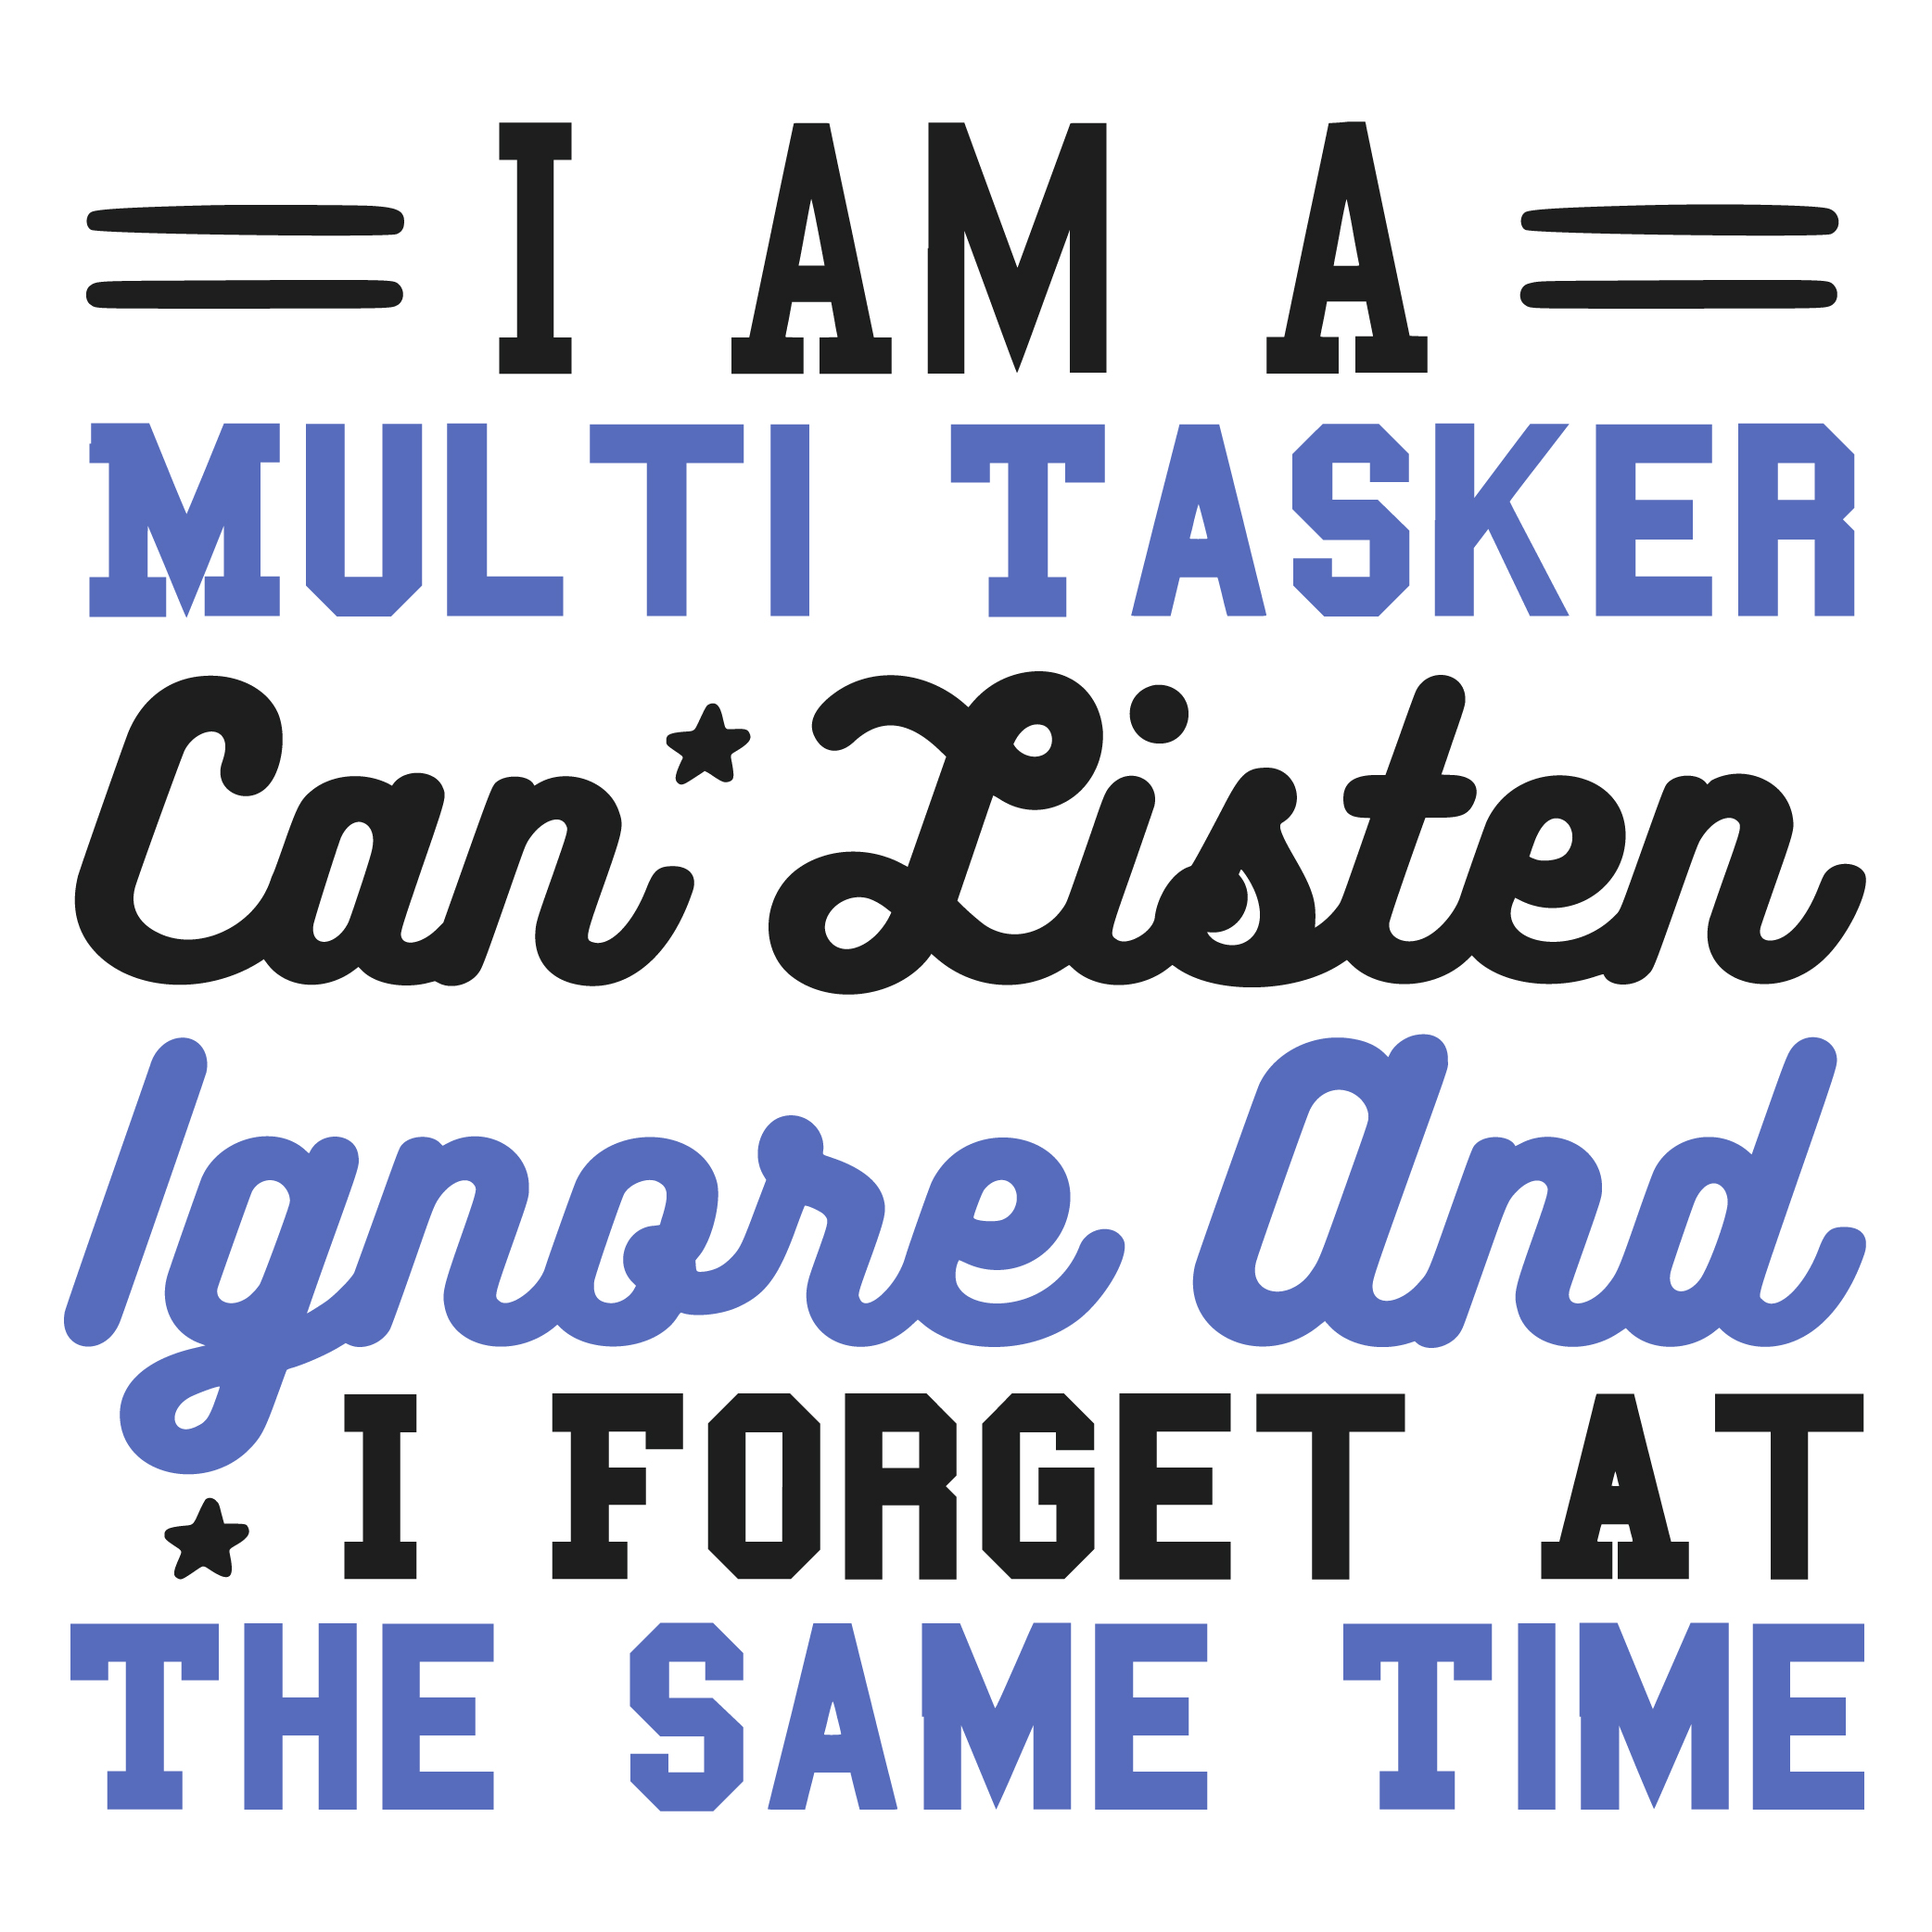 i am a multi tasker can listen ignore and i forget at the same time woman SVG Boss Lady  Black Lives Matter  Lady Woman Diva Tshirt Cut File Cricut Silhouette Women Empowerment svg Feminism svg Girl Power 